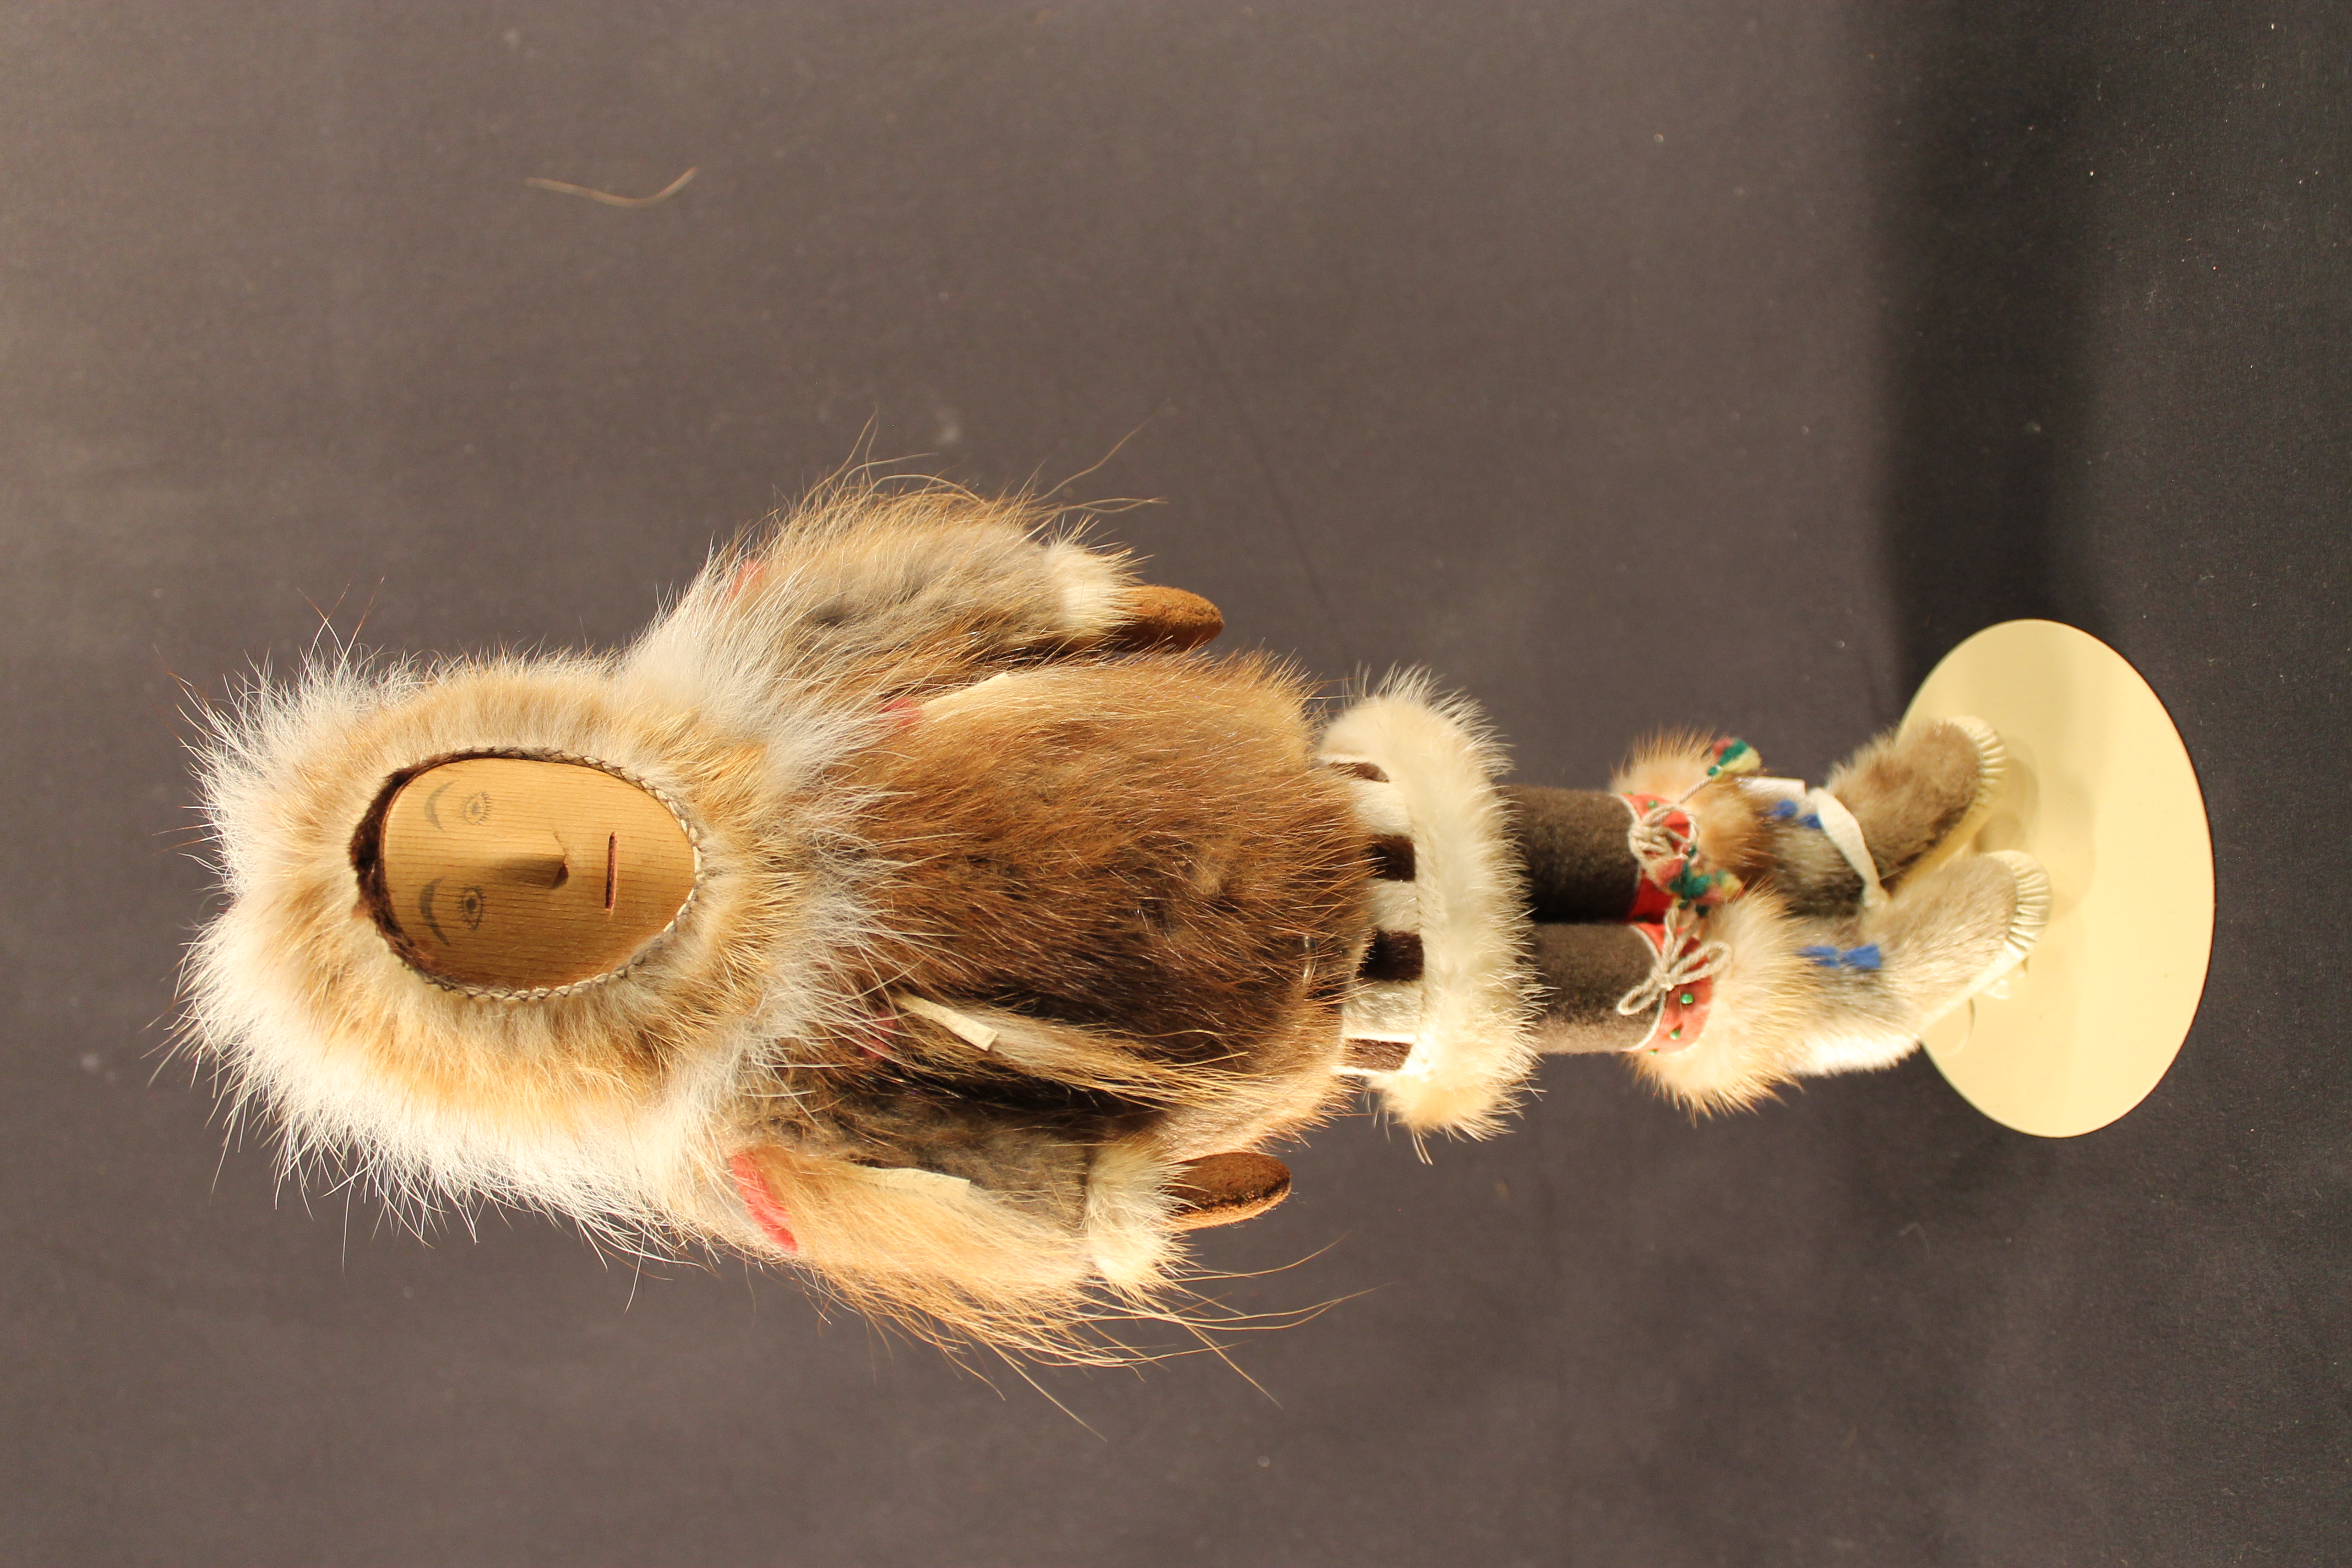 Doll with a wooden face, fur coat, and moccasins. 